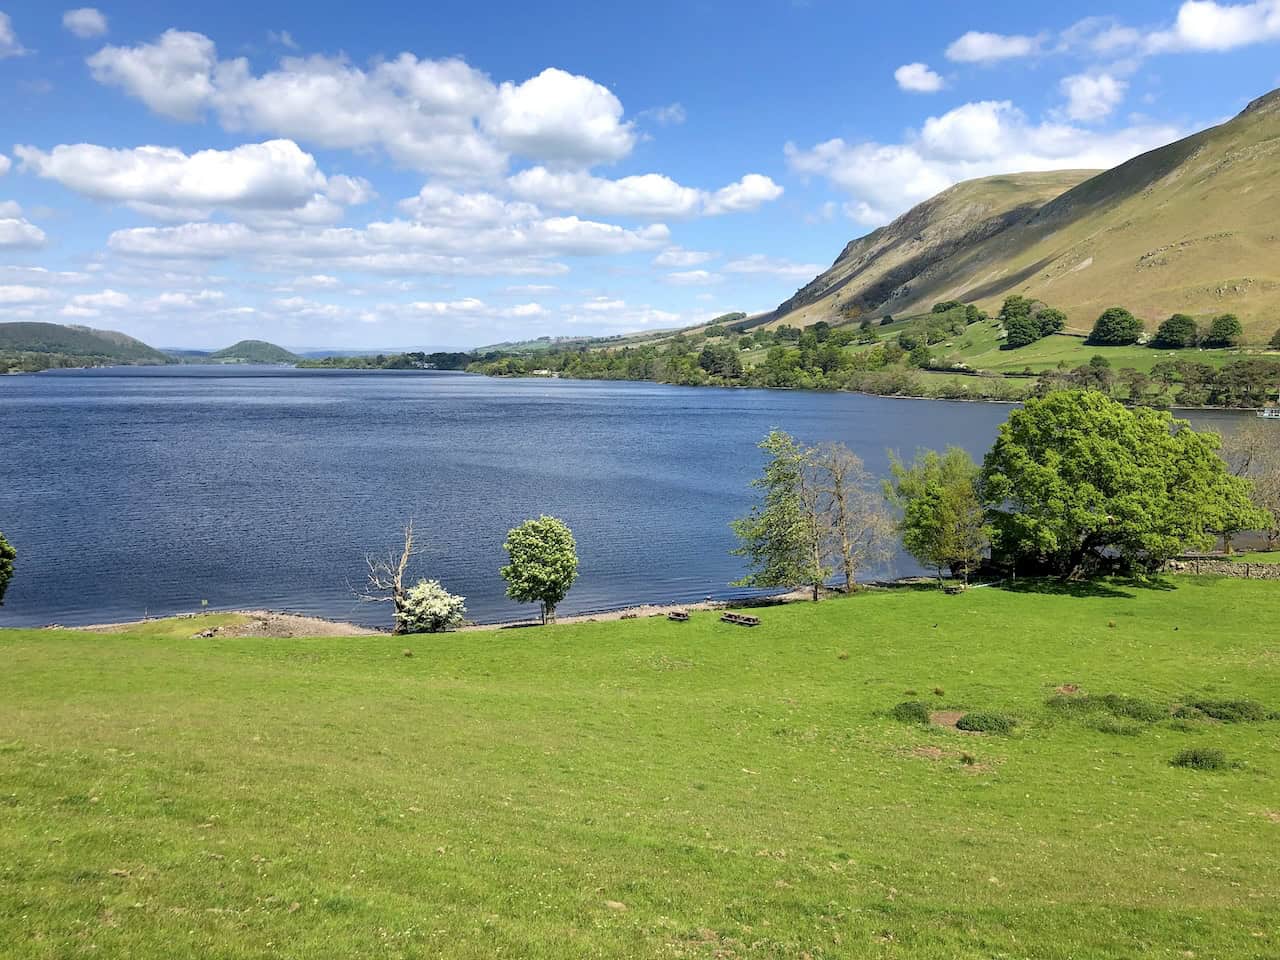 The view north-east over Ullswater towards Pooley Bridge, which is situated on the northern tip of the lake.